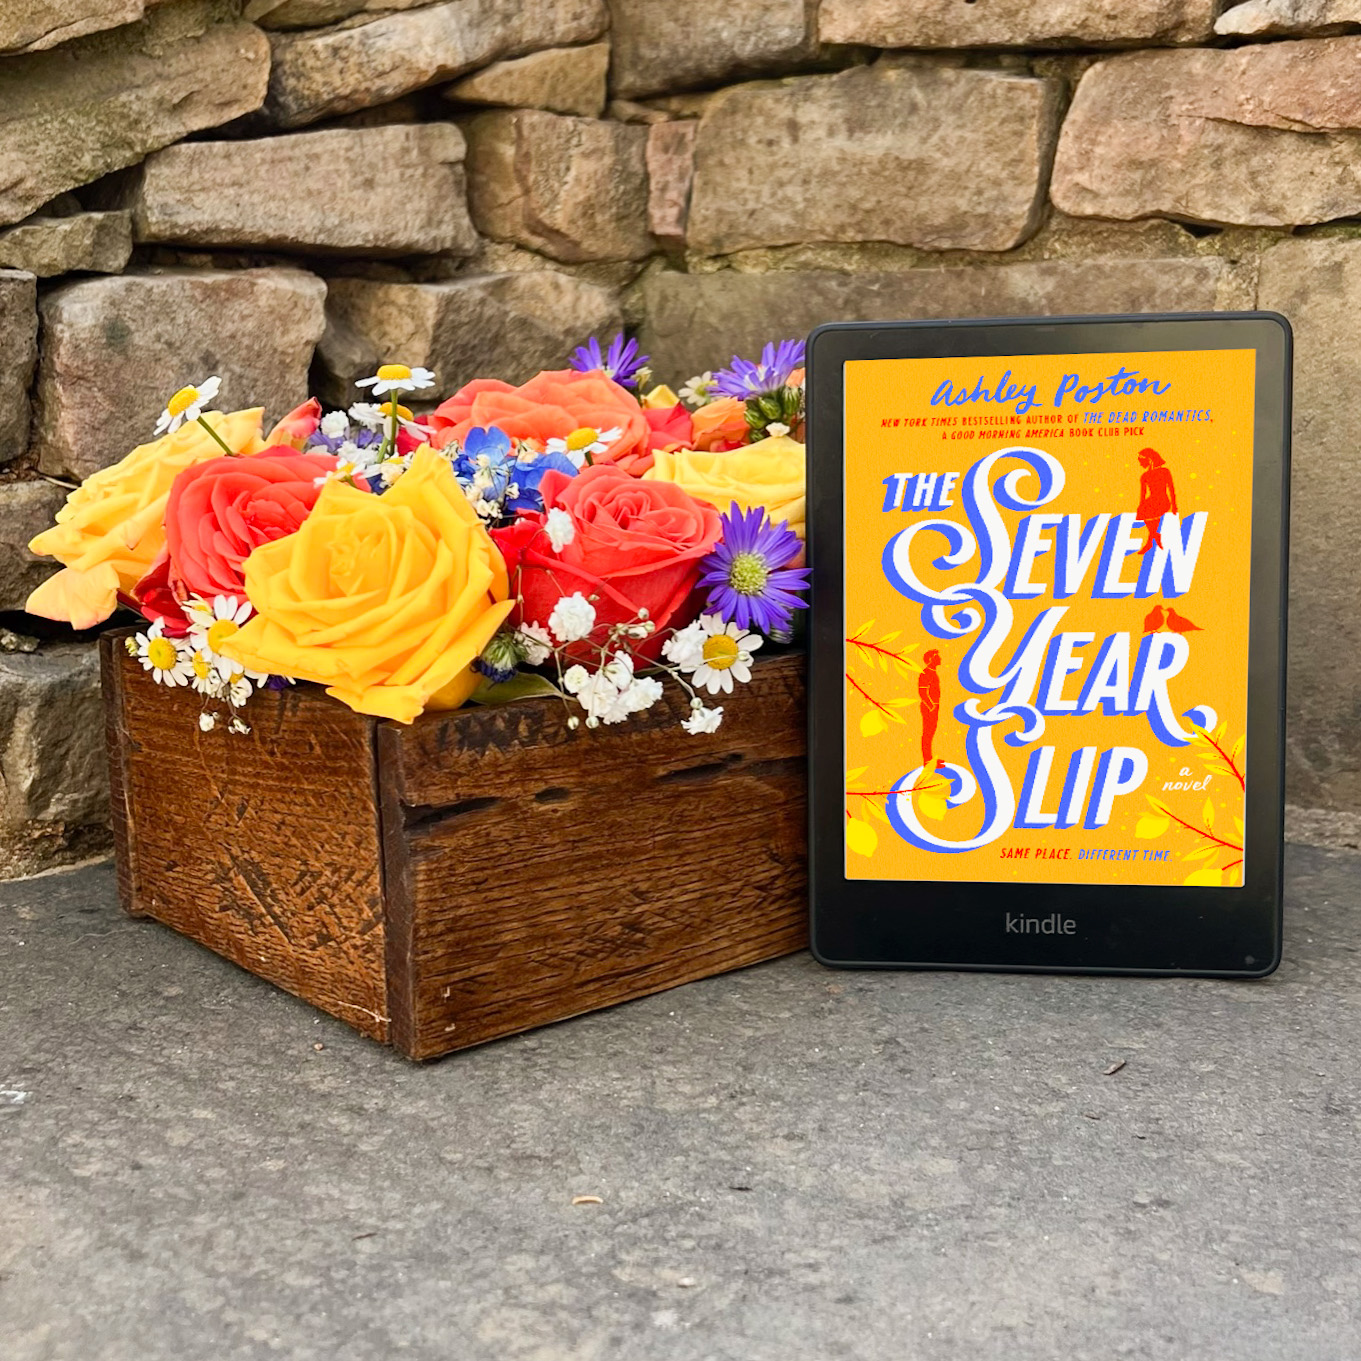 Review: The Seven Year Slip by Ashley Poston